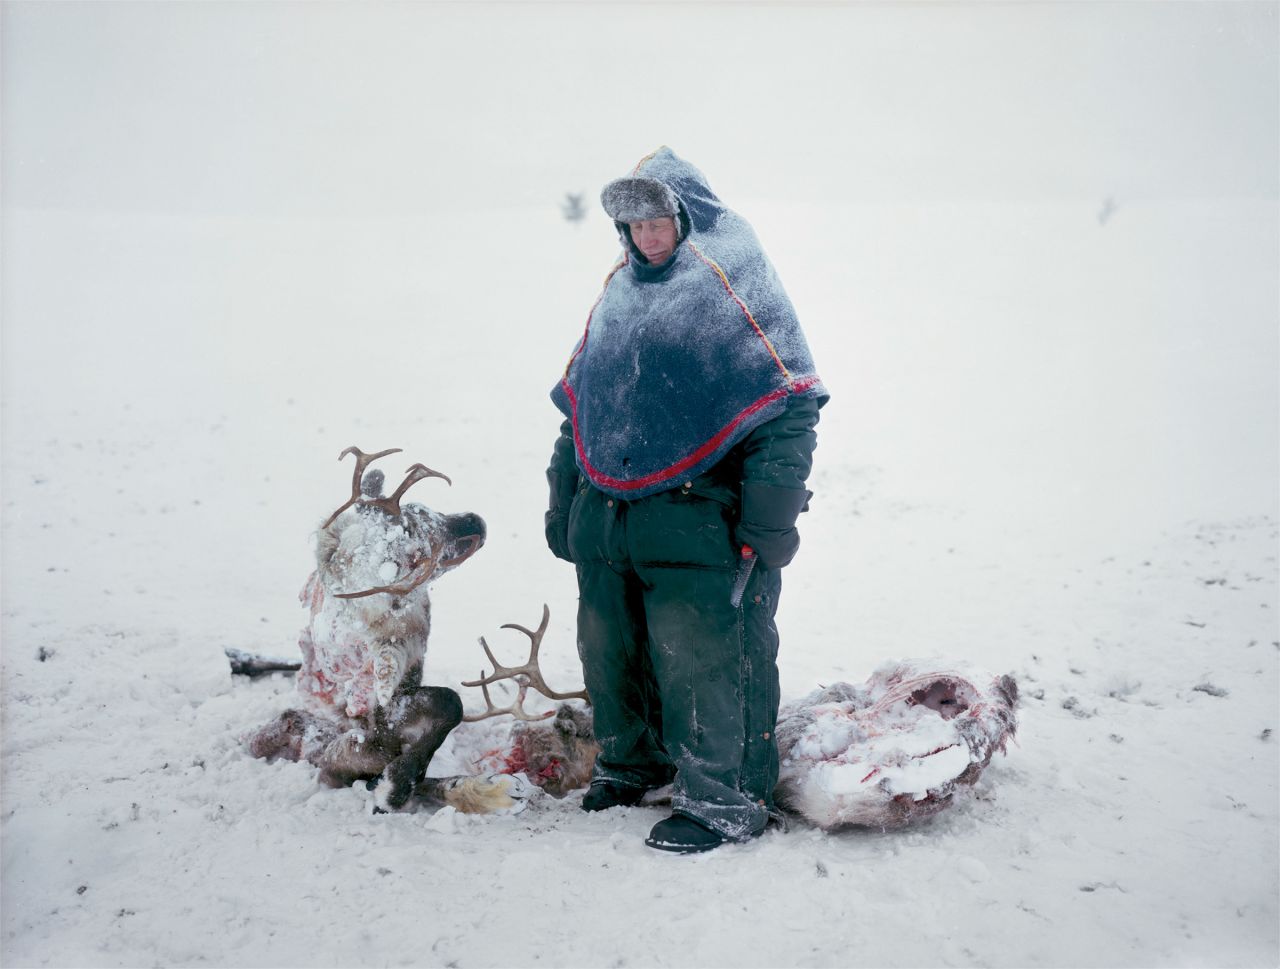 A Sami in Sweden mourns the loss of two reindeer that starved after locking horns in a fight for dominance, in this remarkable photograph by Erika Larsen.